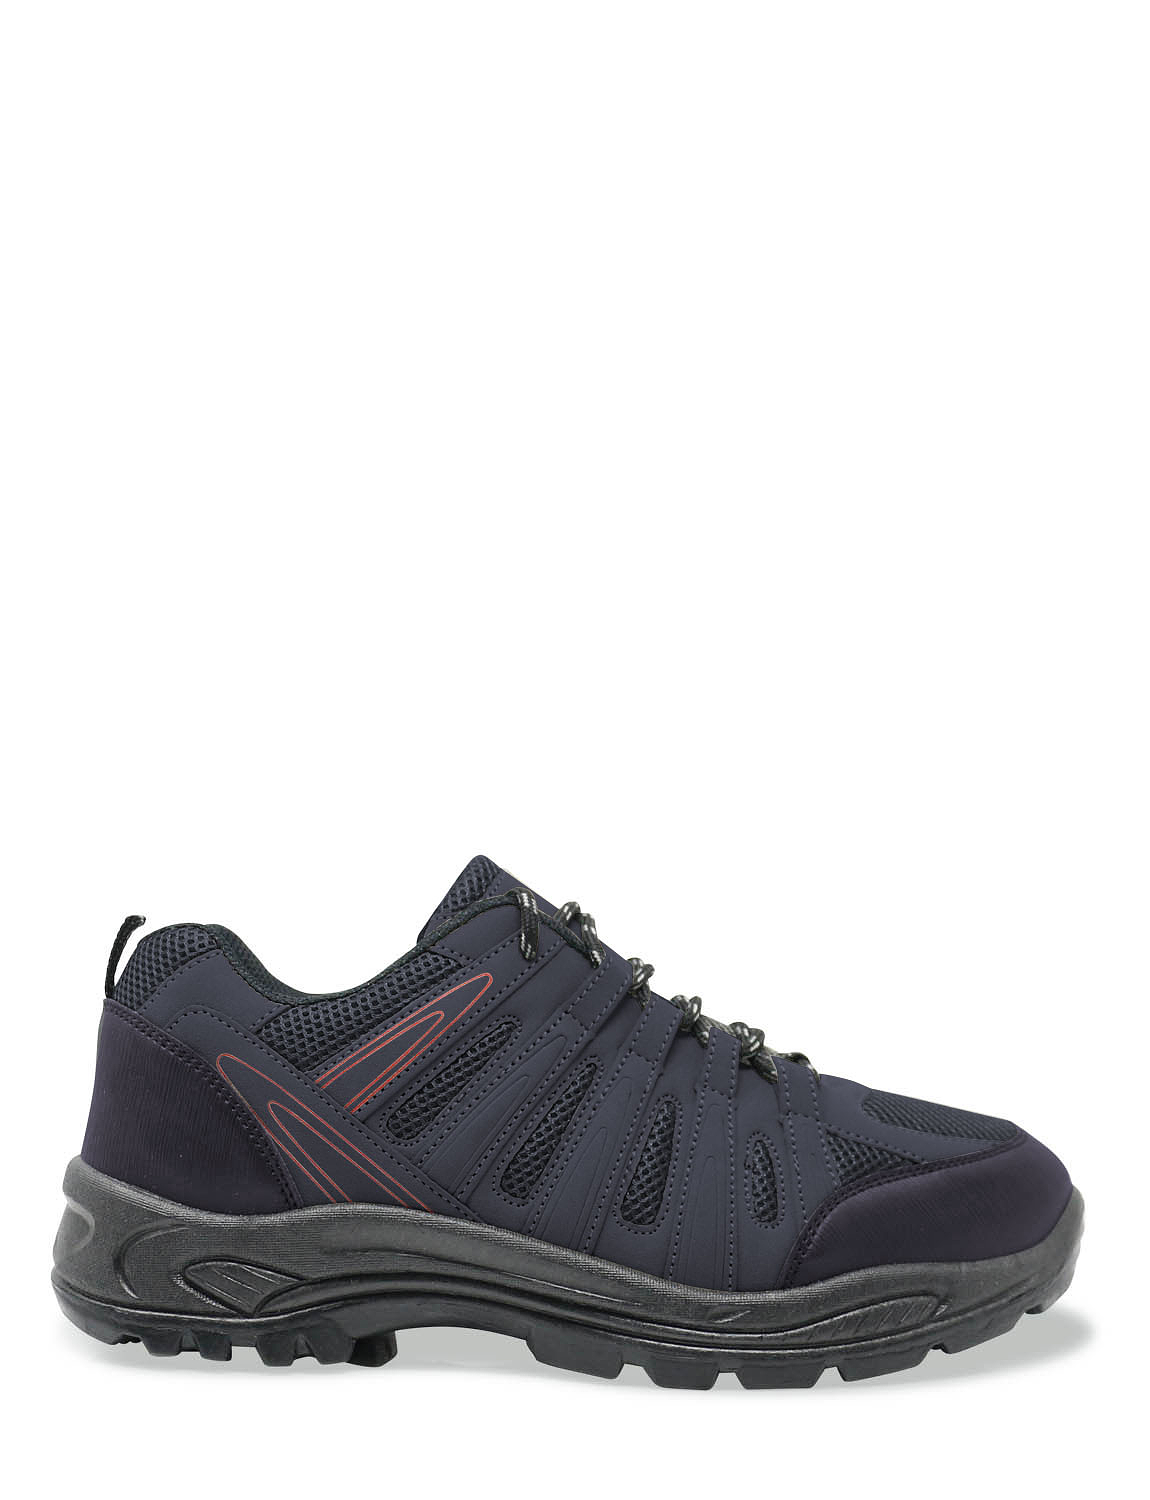 Chums Mens Wide Fit Lace Walking Shoe Navy